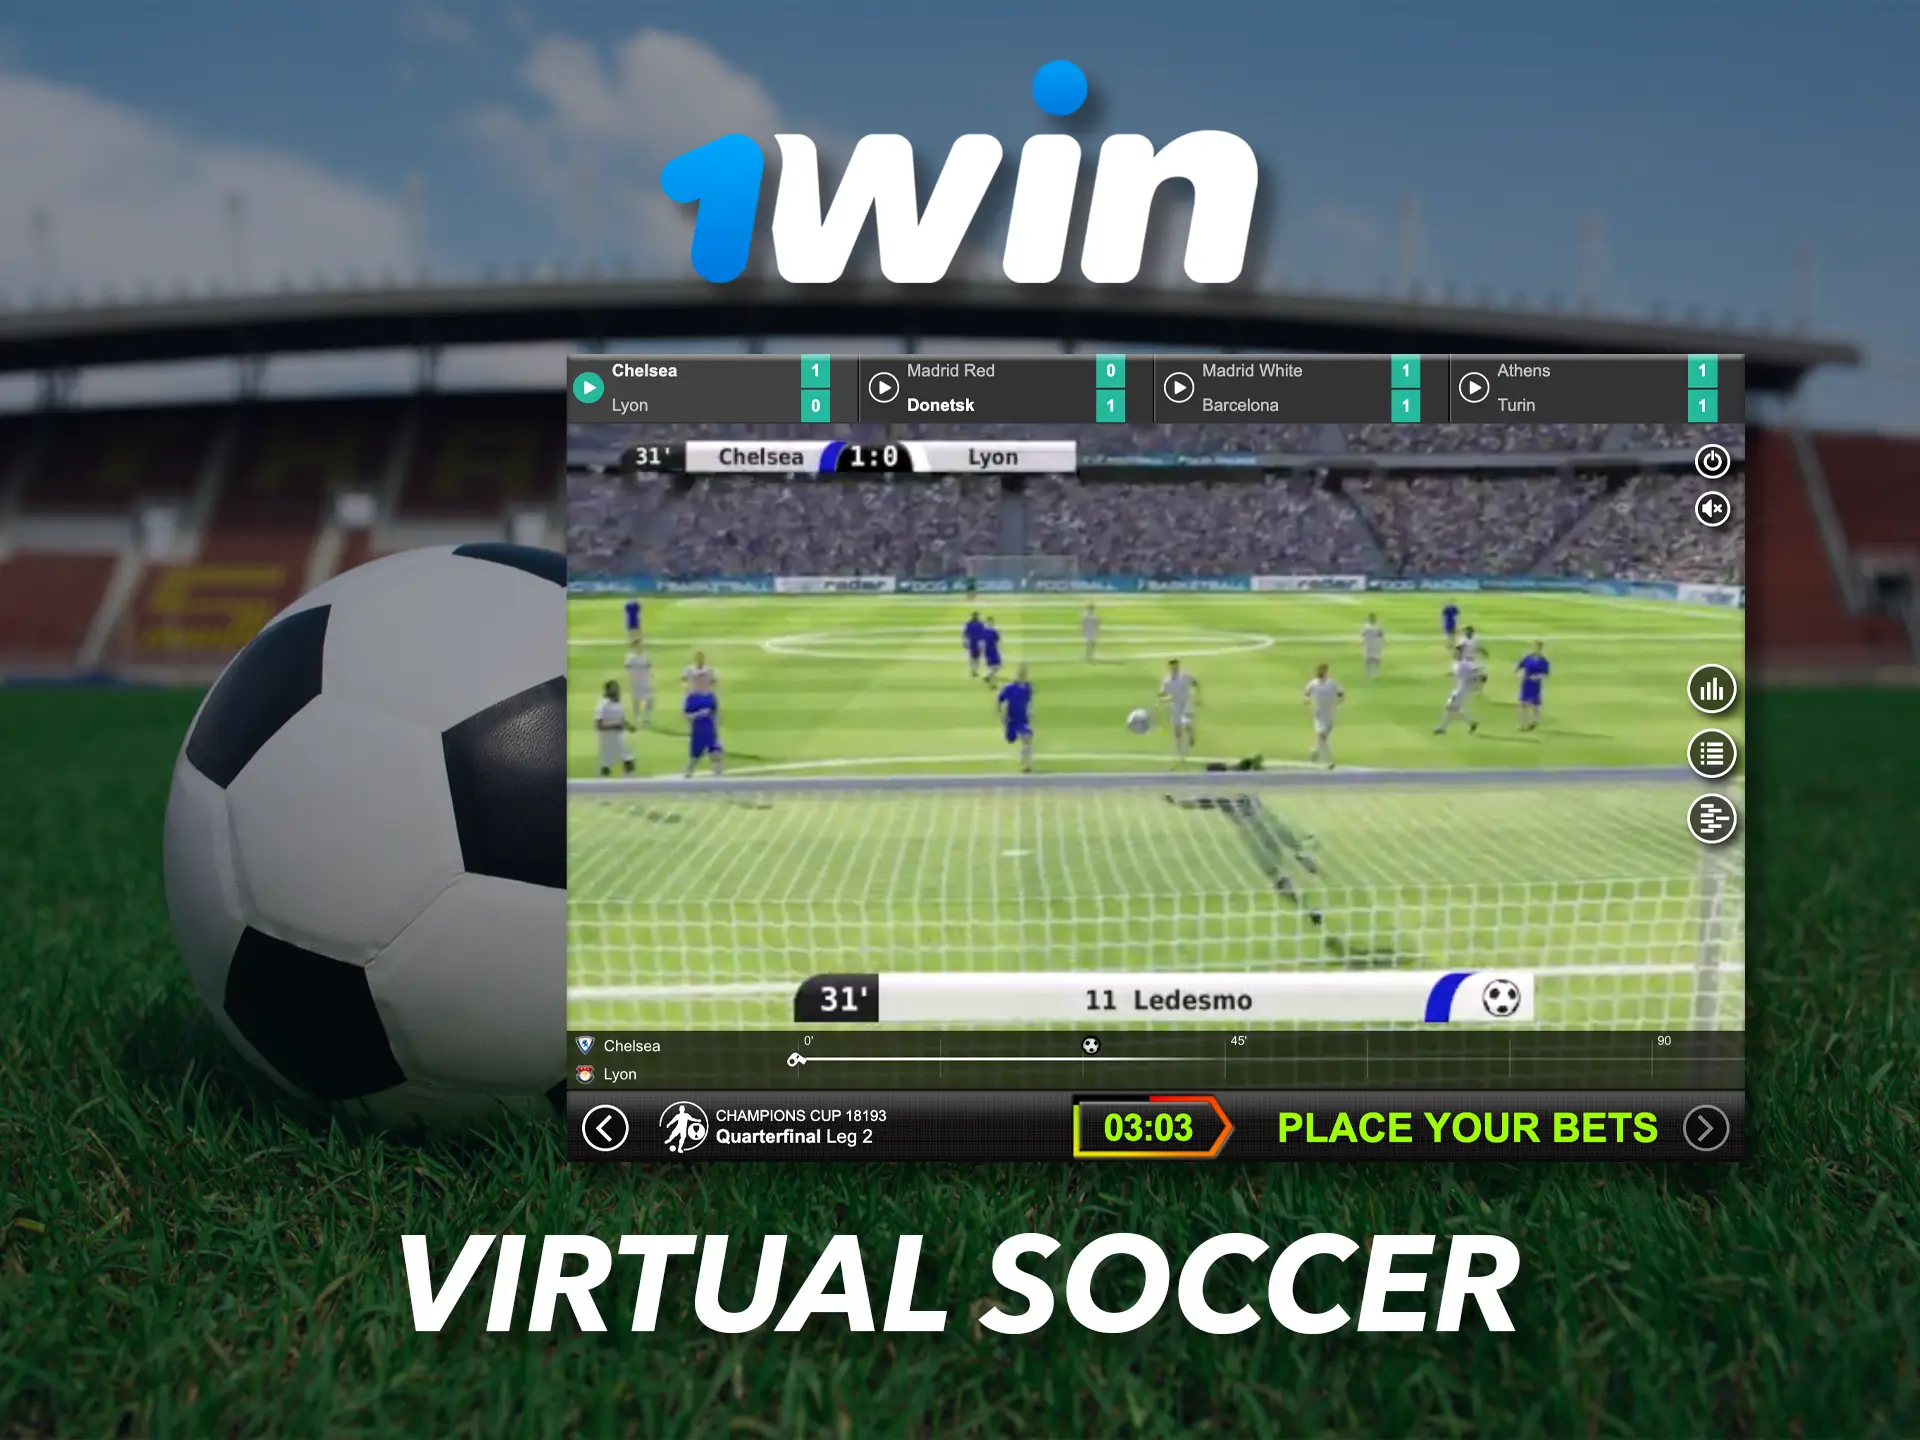 Virtual football in 1Win is characterised by high graphics and smooth operation.